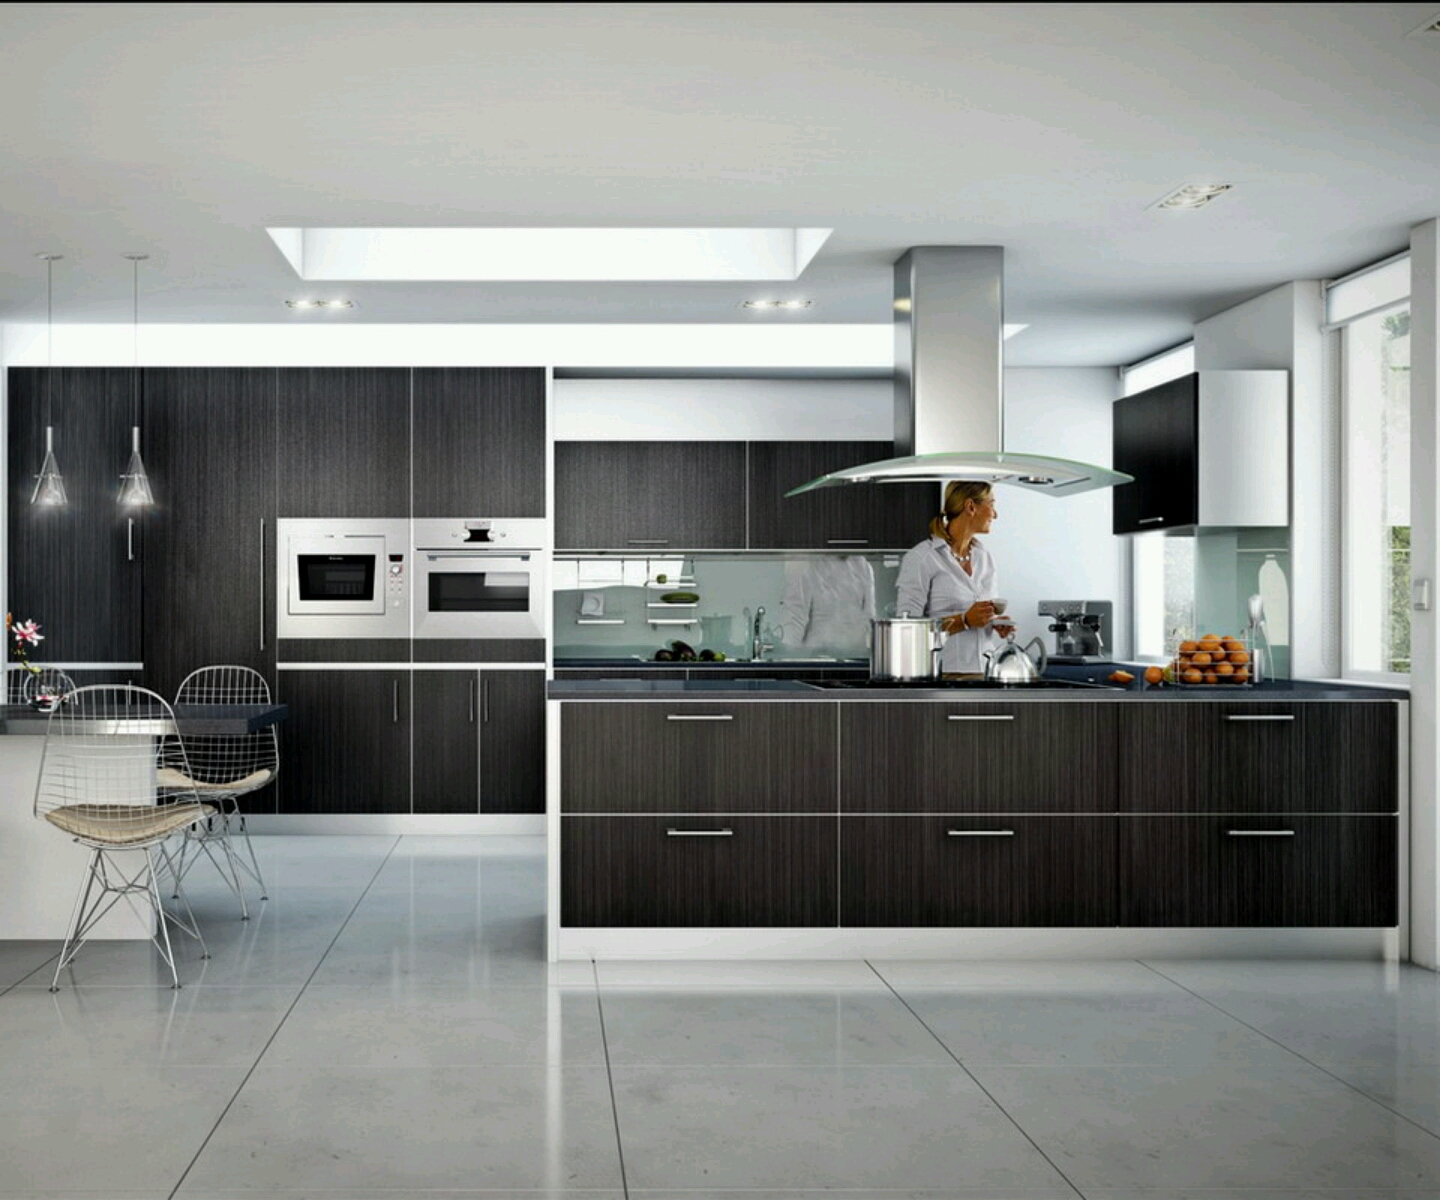 modern designs kitchen kitchens homes cabinets ultra cabinet simple style layout nice latest materials trends tips interior furniture innovative countertop